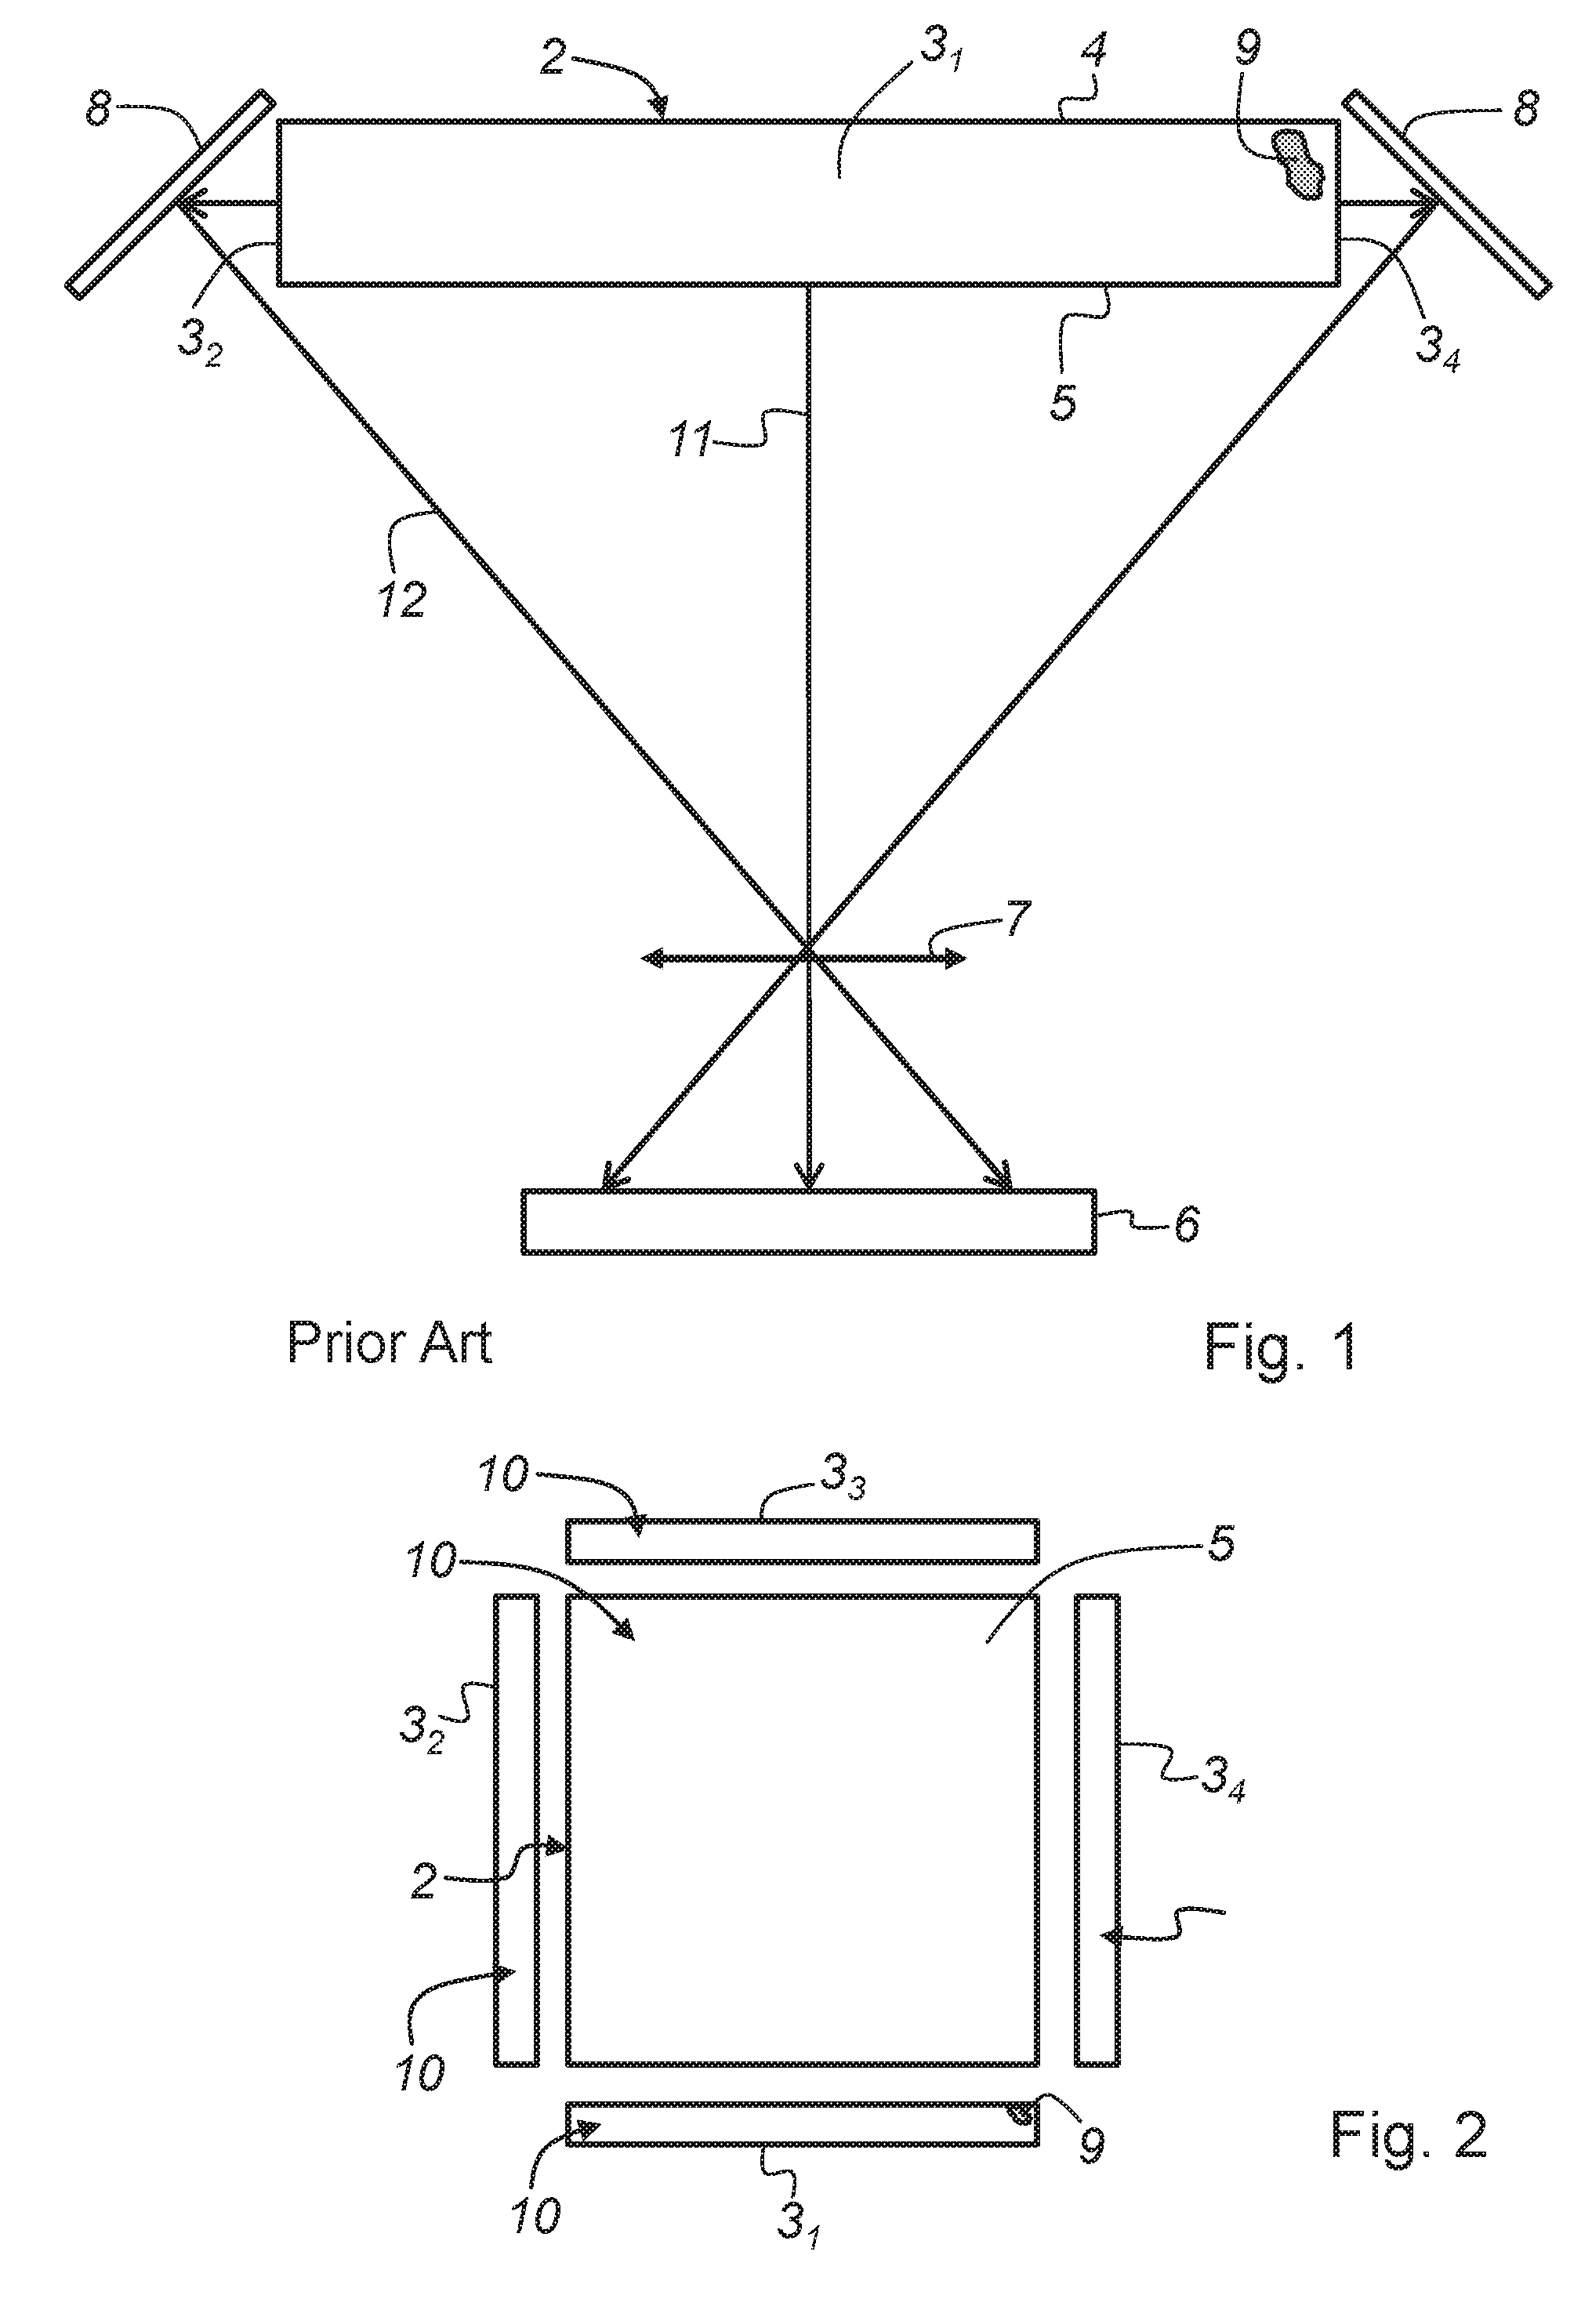 Apparatus, method and computer program product for defect detection in work pieces